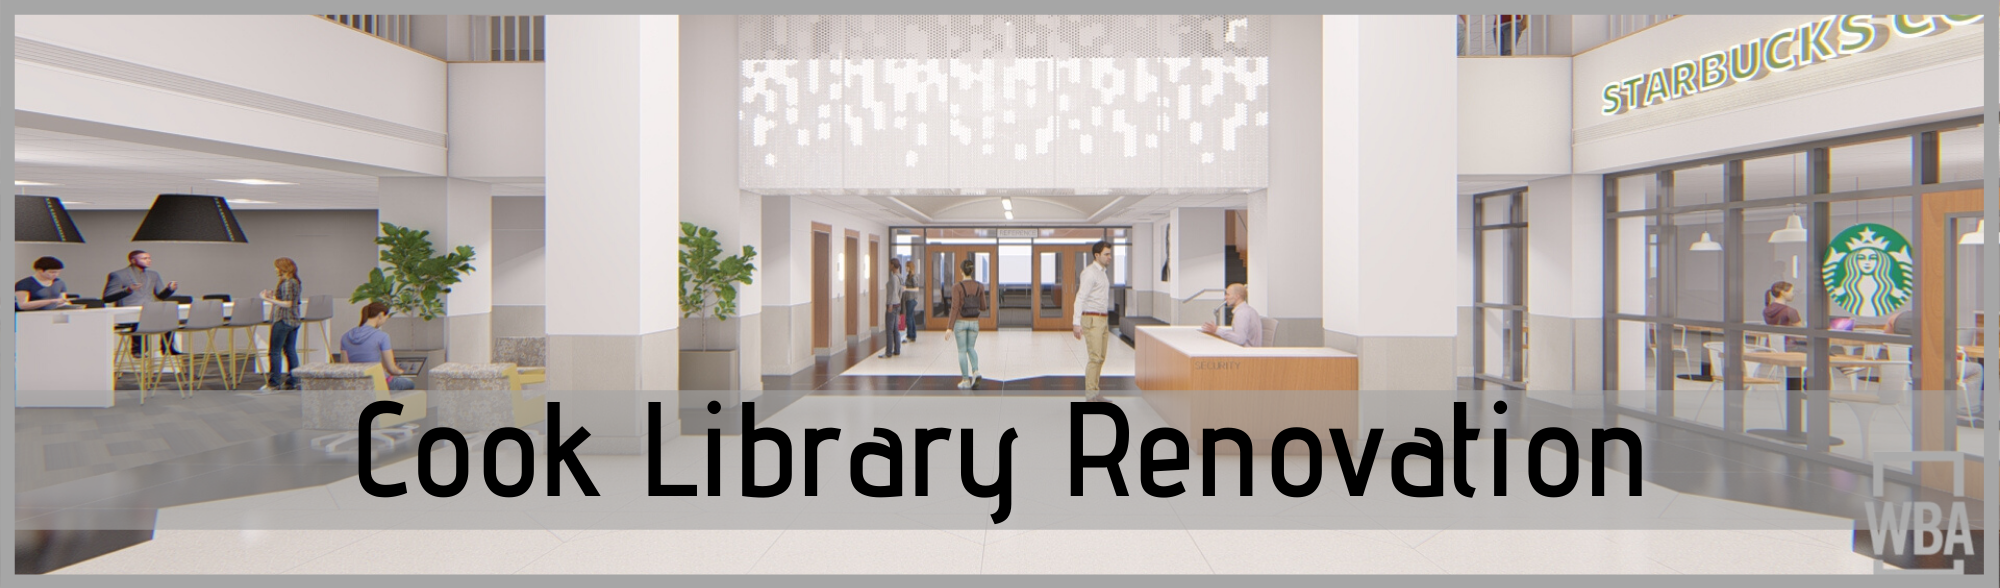 Image is a digital drawing of the lobby of Cook Library. The lobby has white floors and two large white columns on the left and the right. The ceiling is a light brown wooden ceiling. Next to the right column is a wooden desk with a white counter and a person behind the counter and one standing in front of the counter. On the far left side is a long high table with tall chairs and three people sitting and standing around the table. To the close right of that are two arm chairs with one person sitting. Inside the left column are three elevator doors with three people standing. Beyond the elevators are two sets of wood frame doors with glass. Across the bottom is the text Cook Library Renovation.